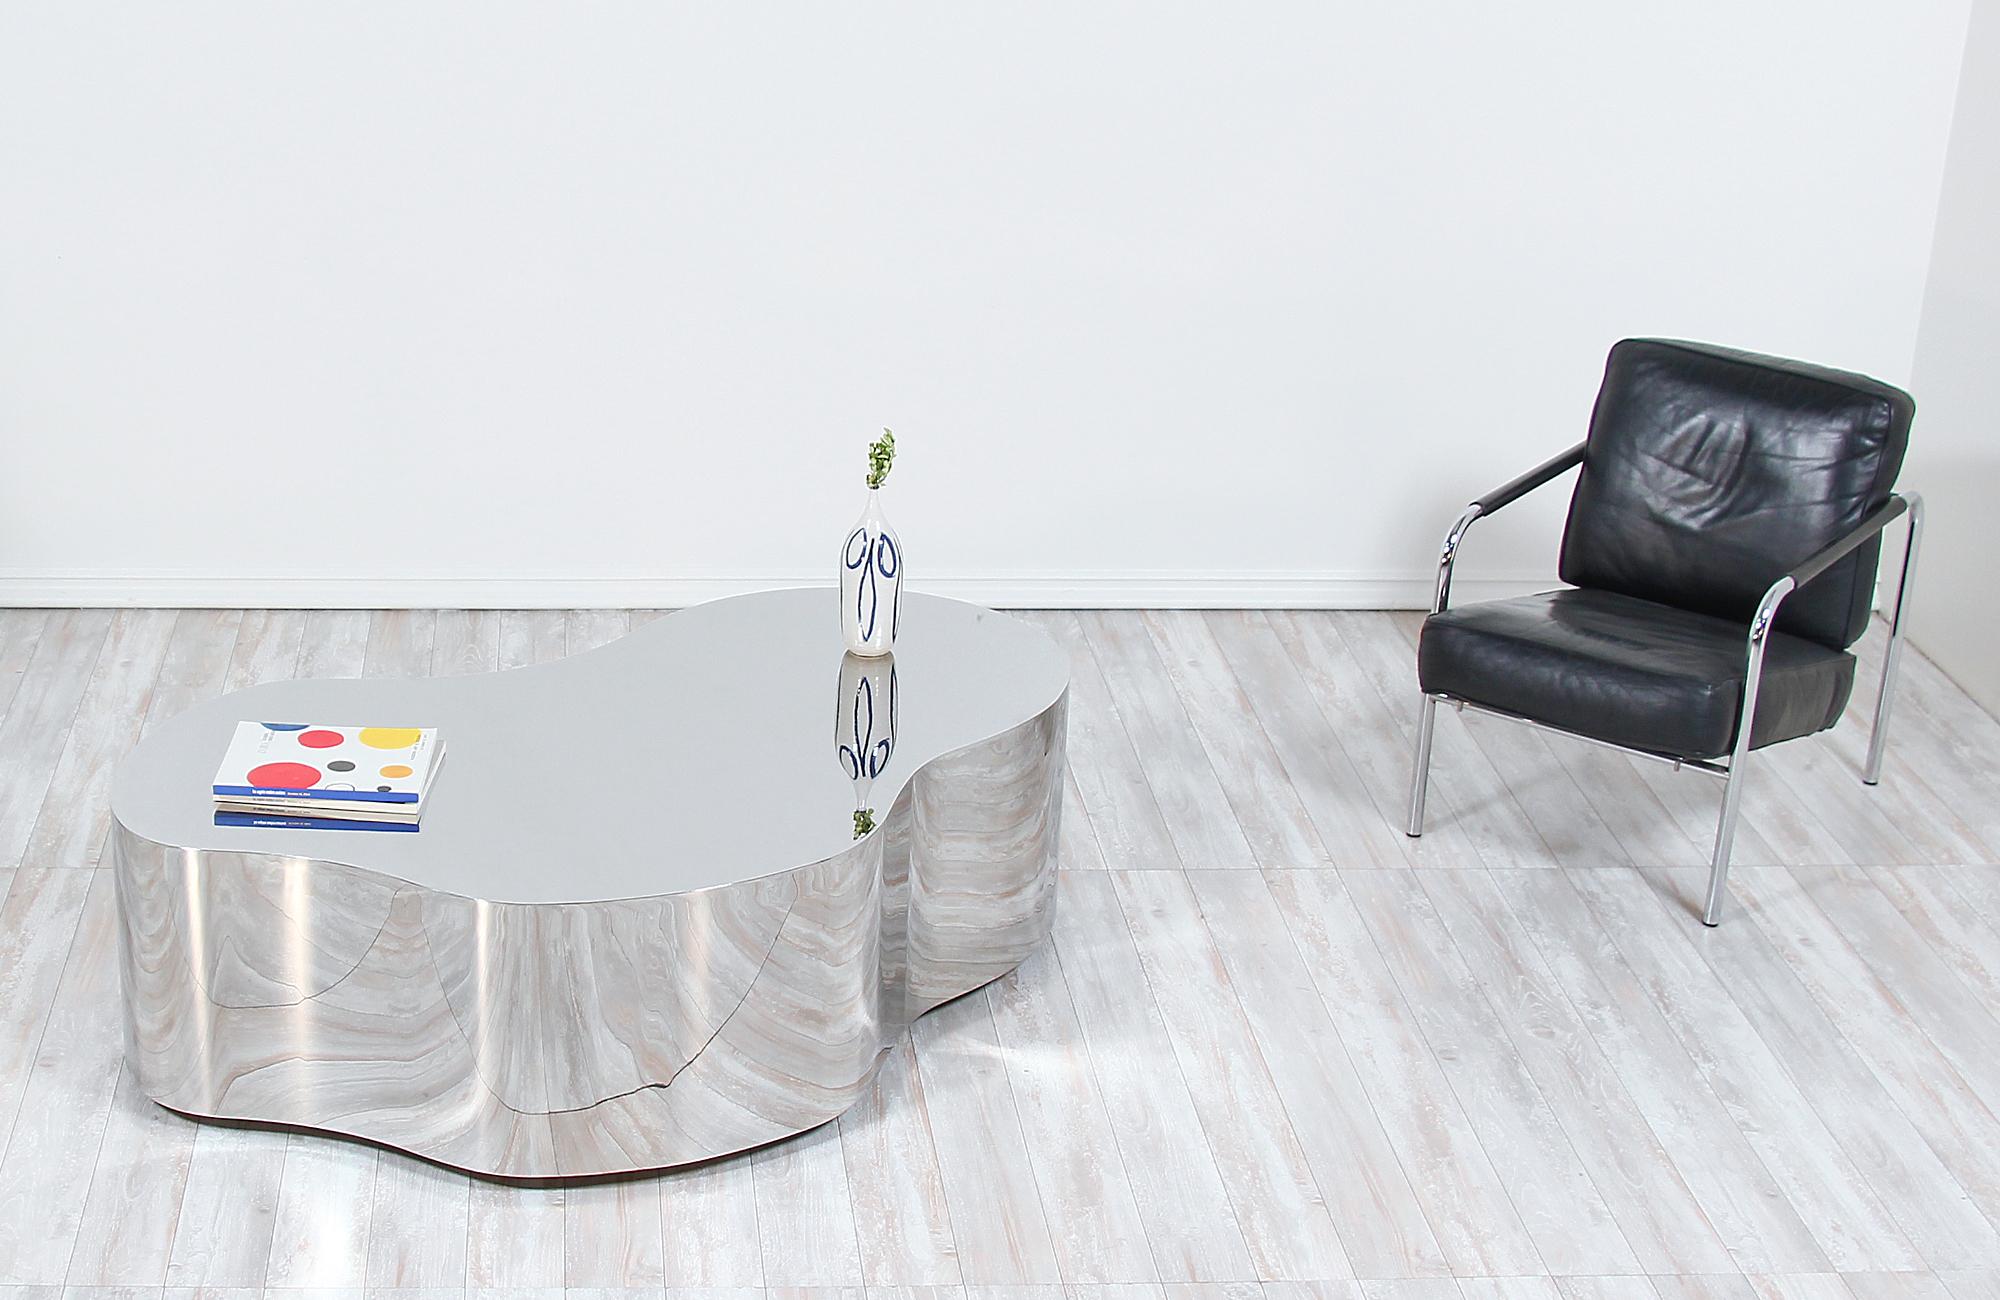 Iconic freeform low table designed and manufactured by Karl Springer in the United States, circa 1970. Designed by one of the most influential furniture designers of the later 20th century, this sleek and elegant table design has been meticulously